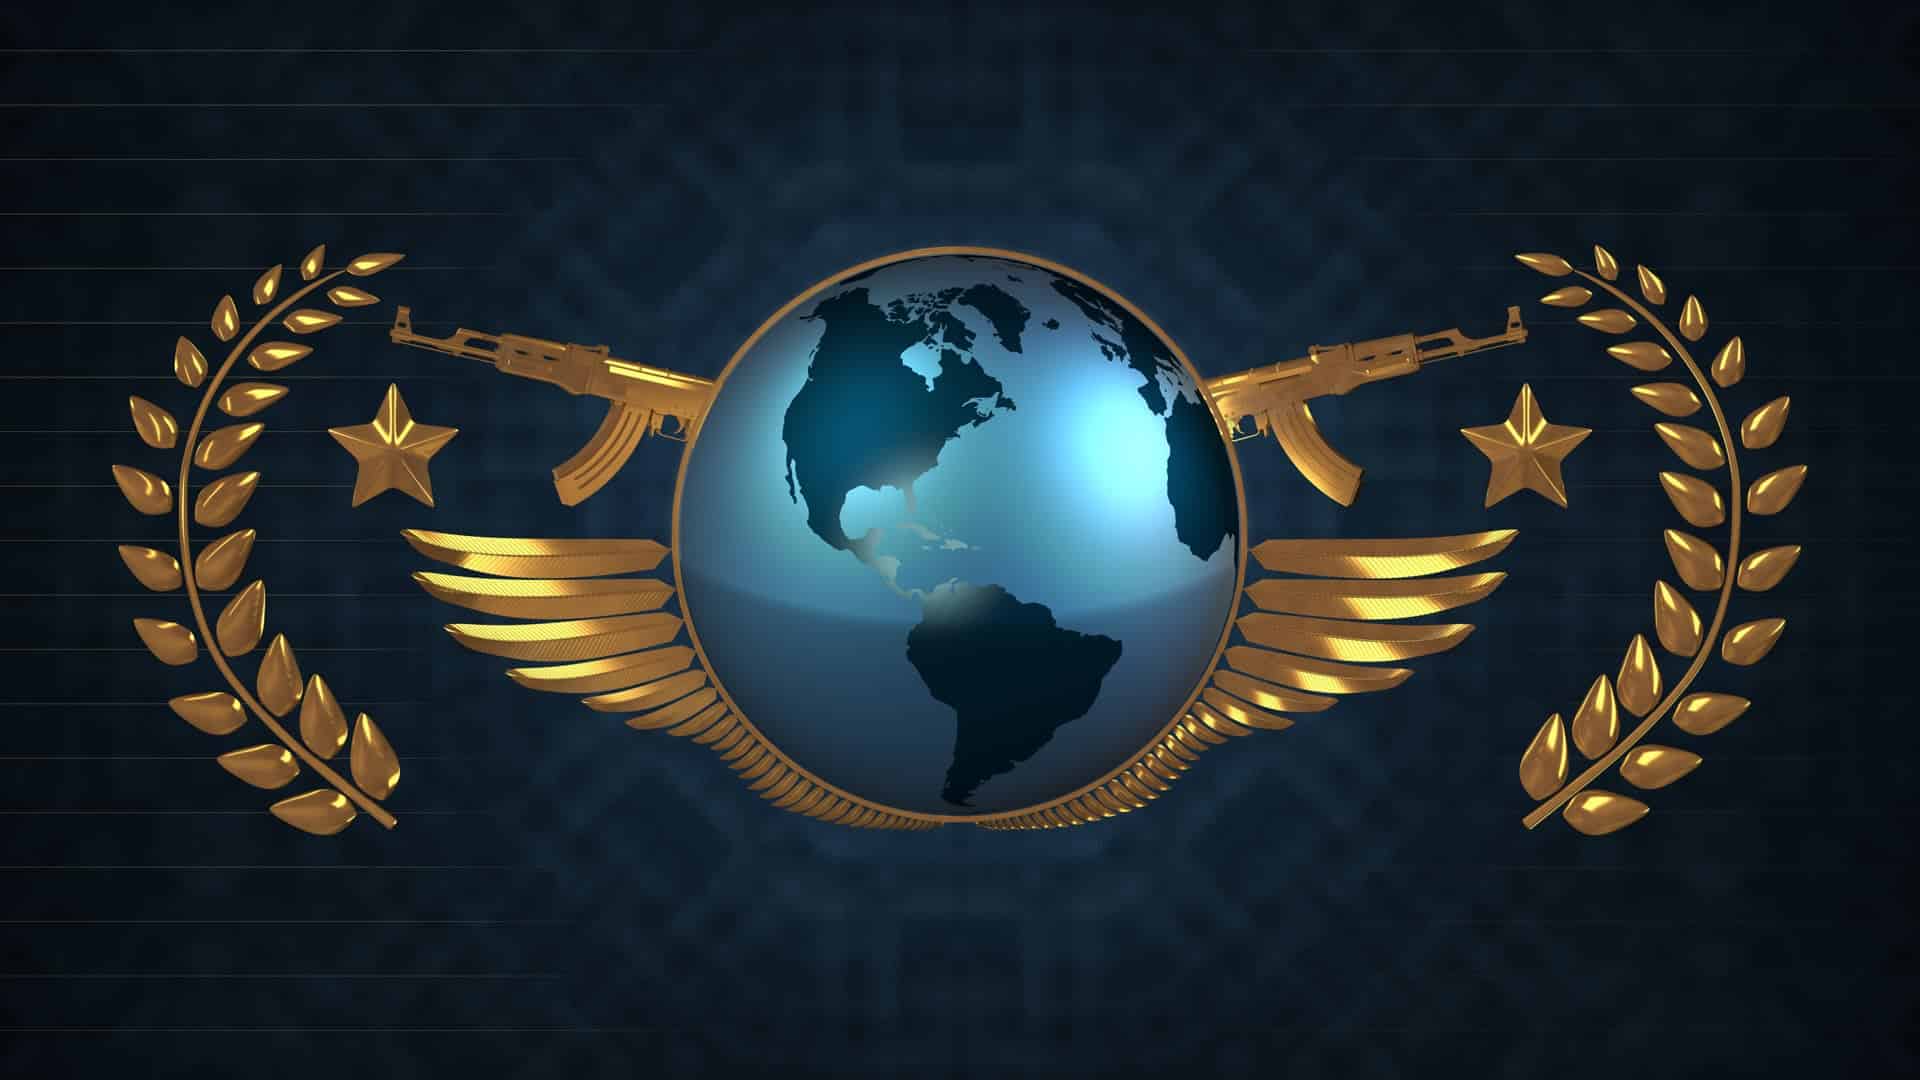 Which Country Has the Highest Number of Global Elites in CSGO?